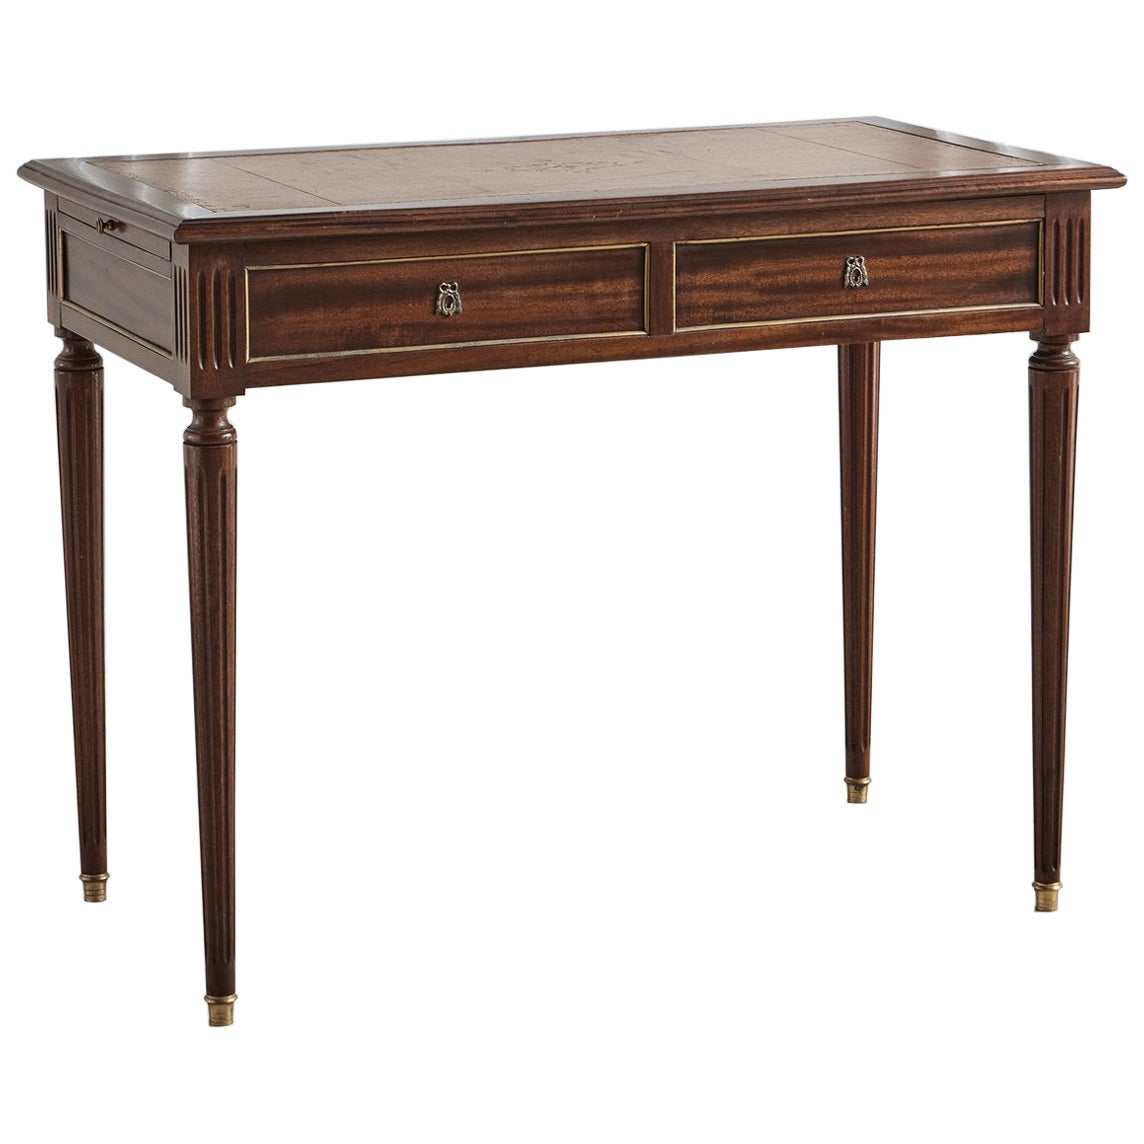 Mahogany Desk With Inlaid Leather Top and Gold Leaf Details, Early 20th Century